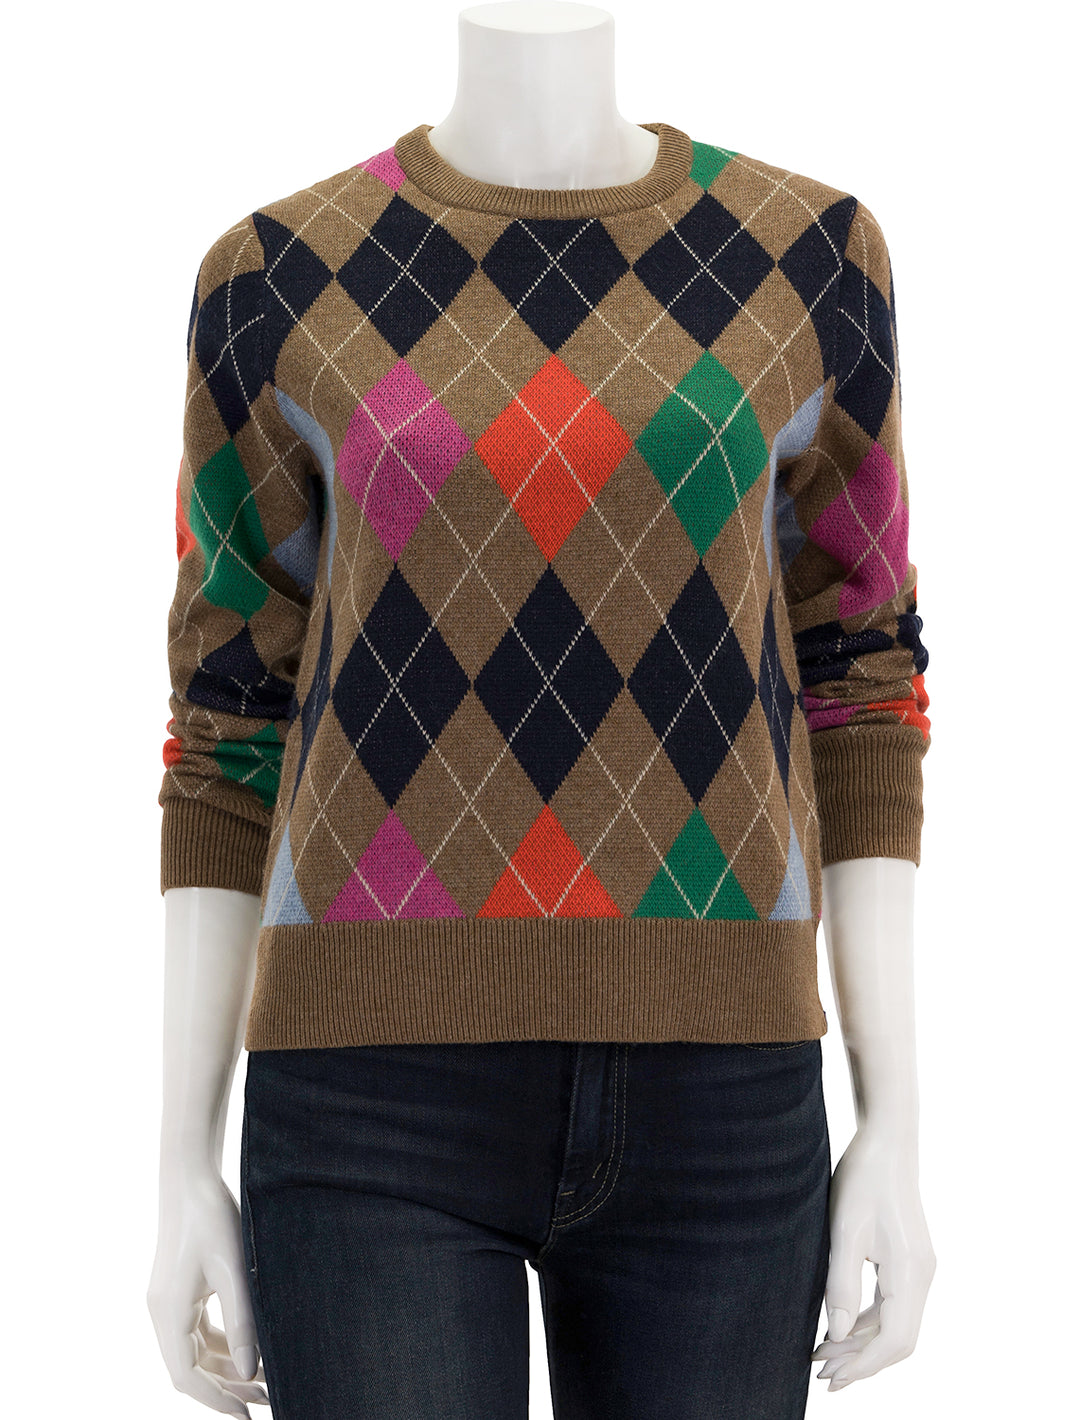 Front view of KULE's the heidi sweater.